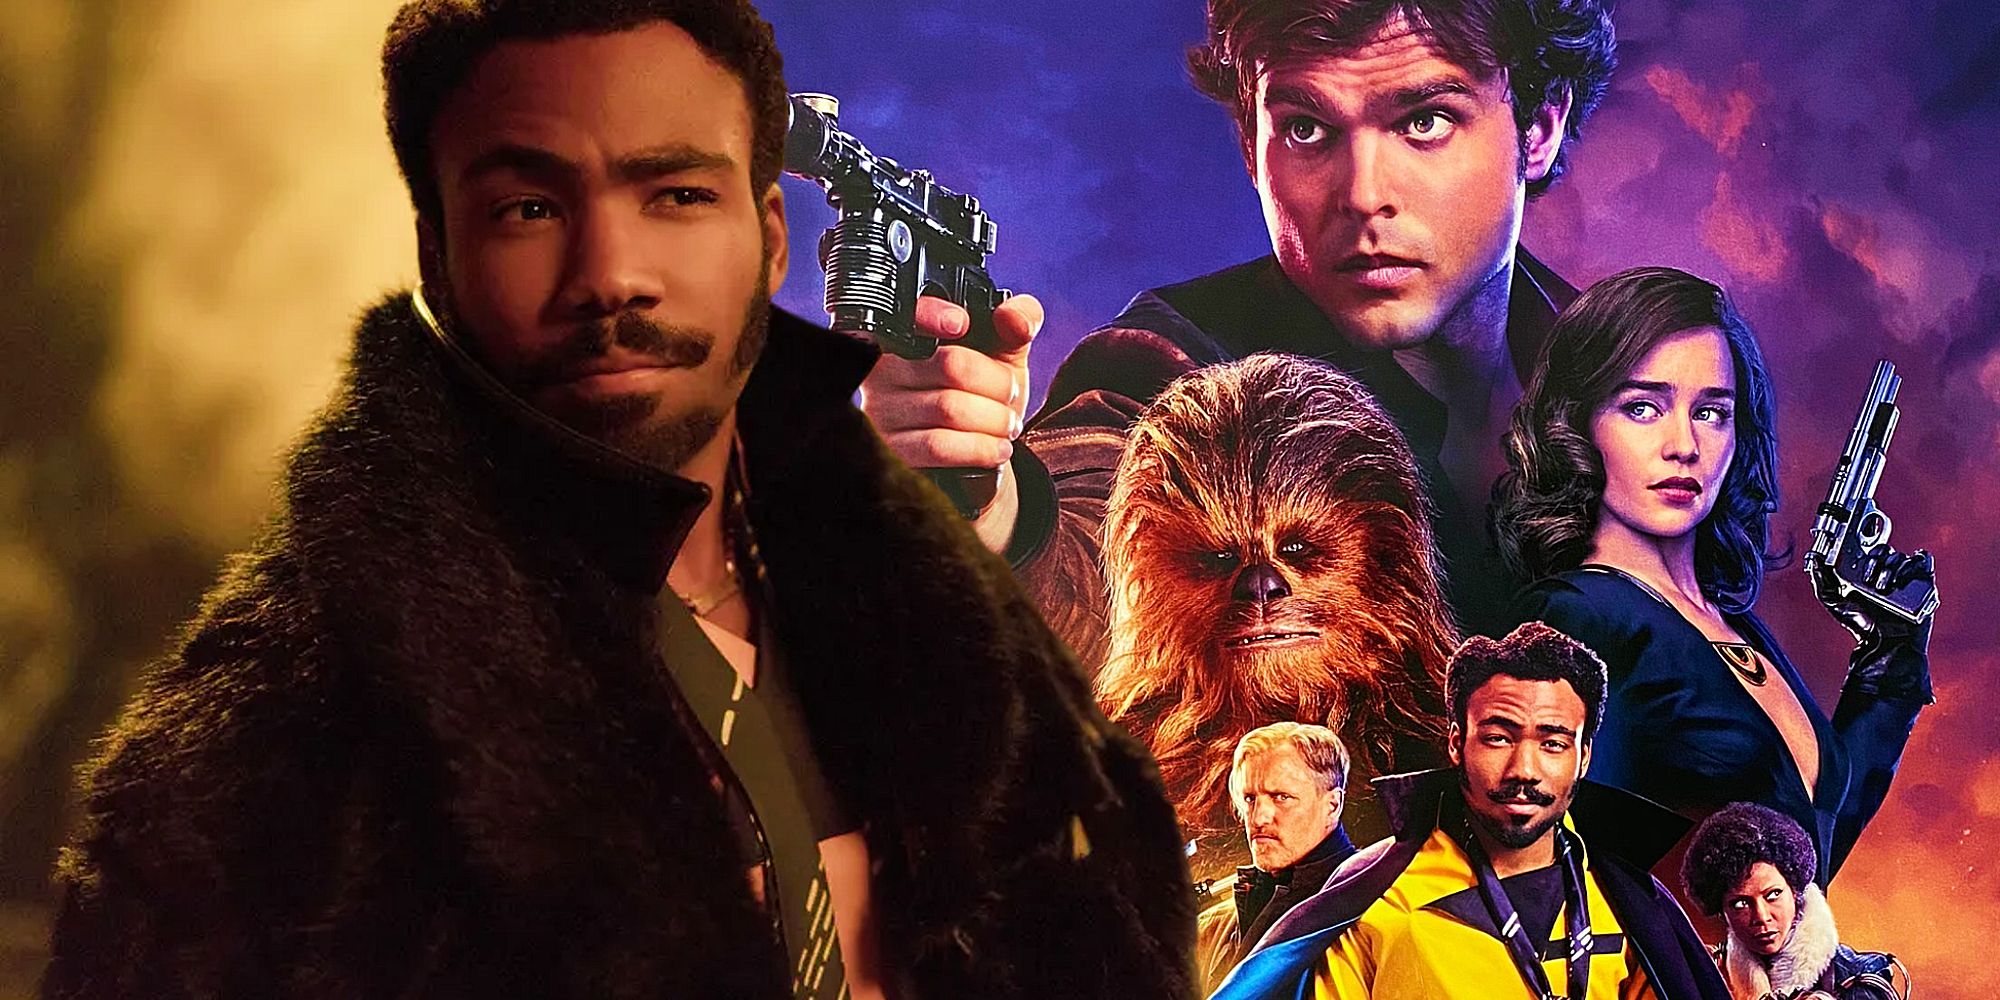 Donald Glover as Lando and the poster for Solo: A Star Wars Story